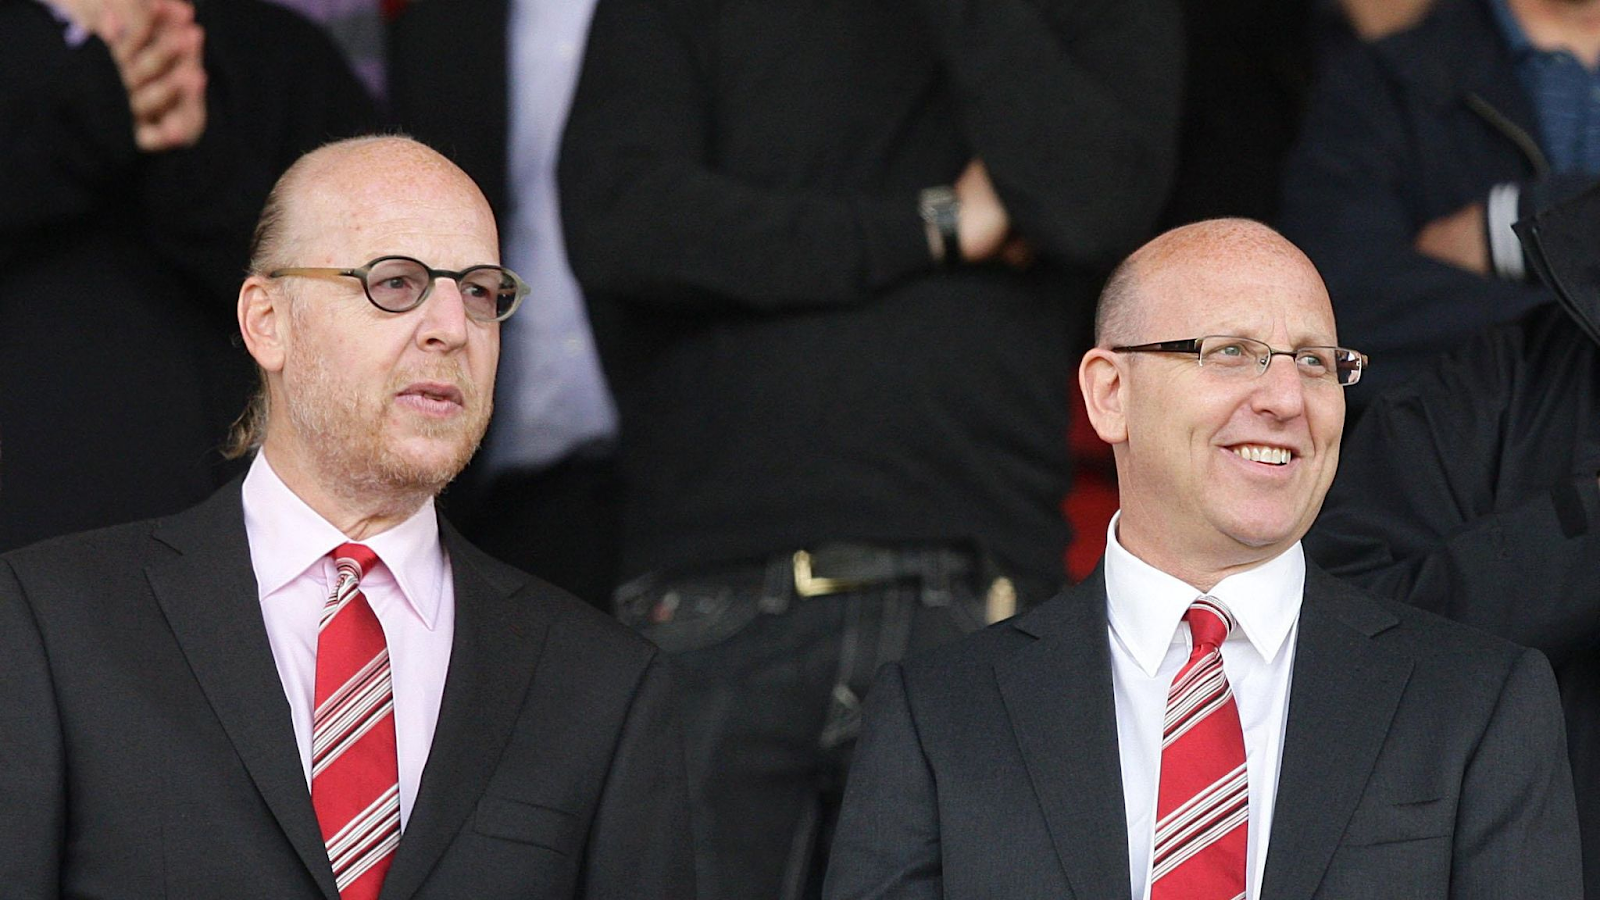 The Glazer family is thinking about selling a small share of the Premier League Club. Bloomberg says that the Glazer family 